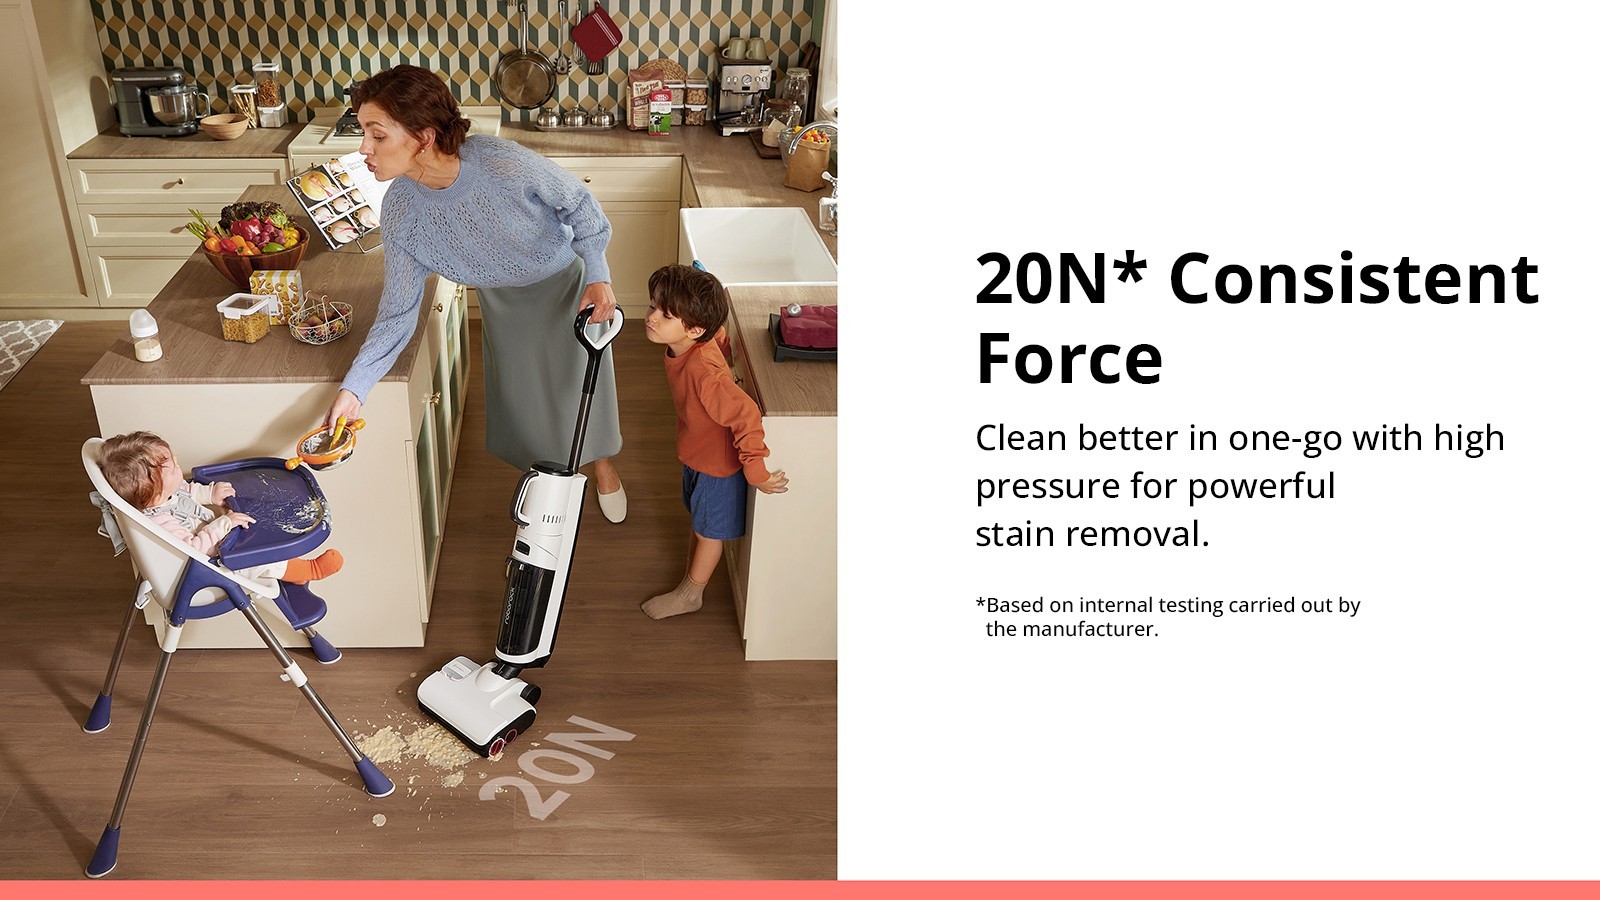 Roborock Dyad Pro Combo 5-in-1 Cordless Wet Dry Vacuum Cleaner 17000Pa Suction Self-Cleaning & Drying Smart Sensor Dust 4000mAh Battery 43 Mins Runtime Display LED App & Voice Control for Hard Floor Carpet Canape bed